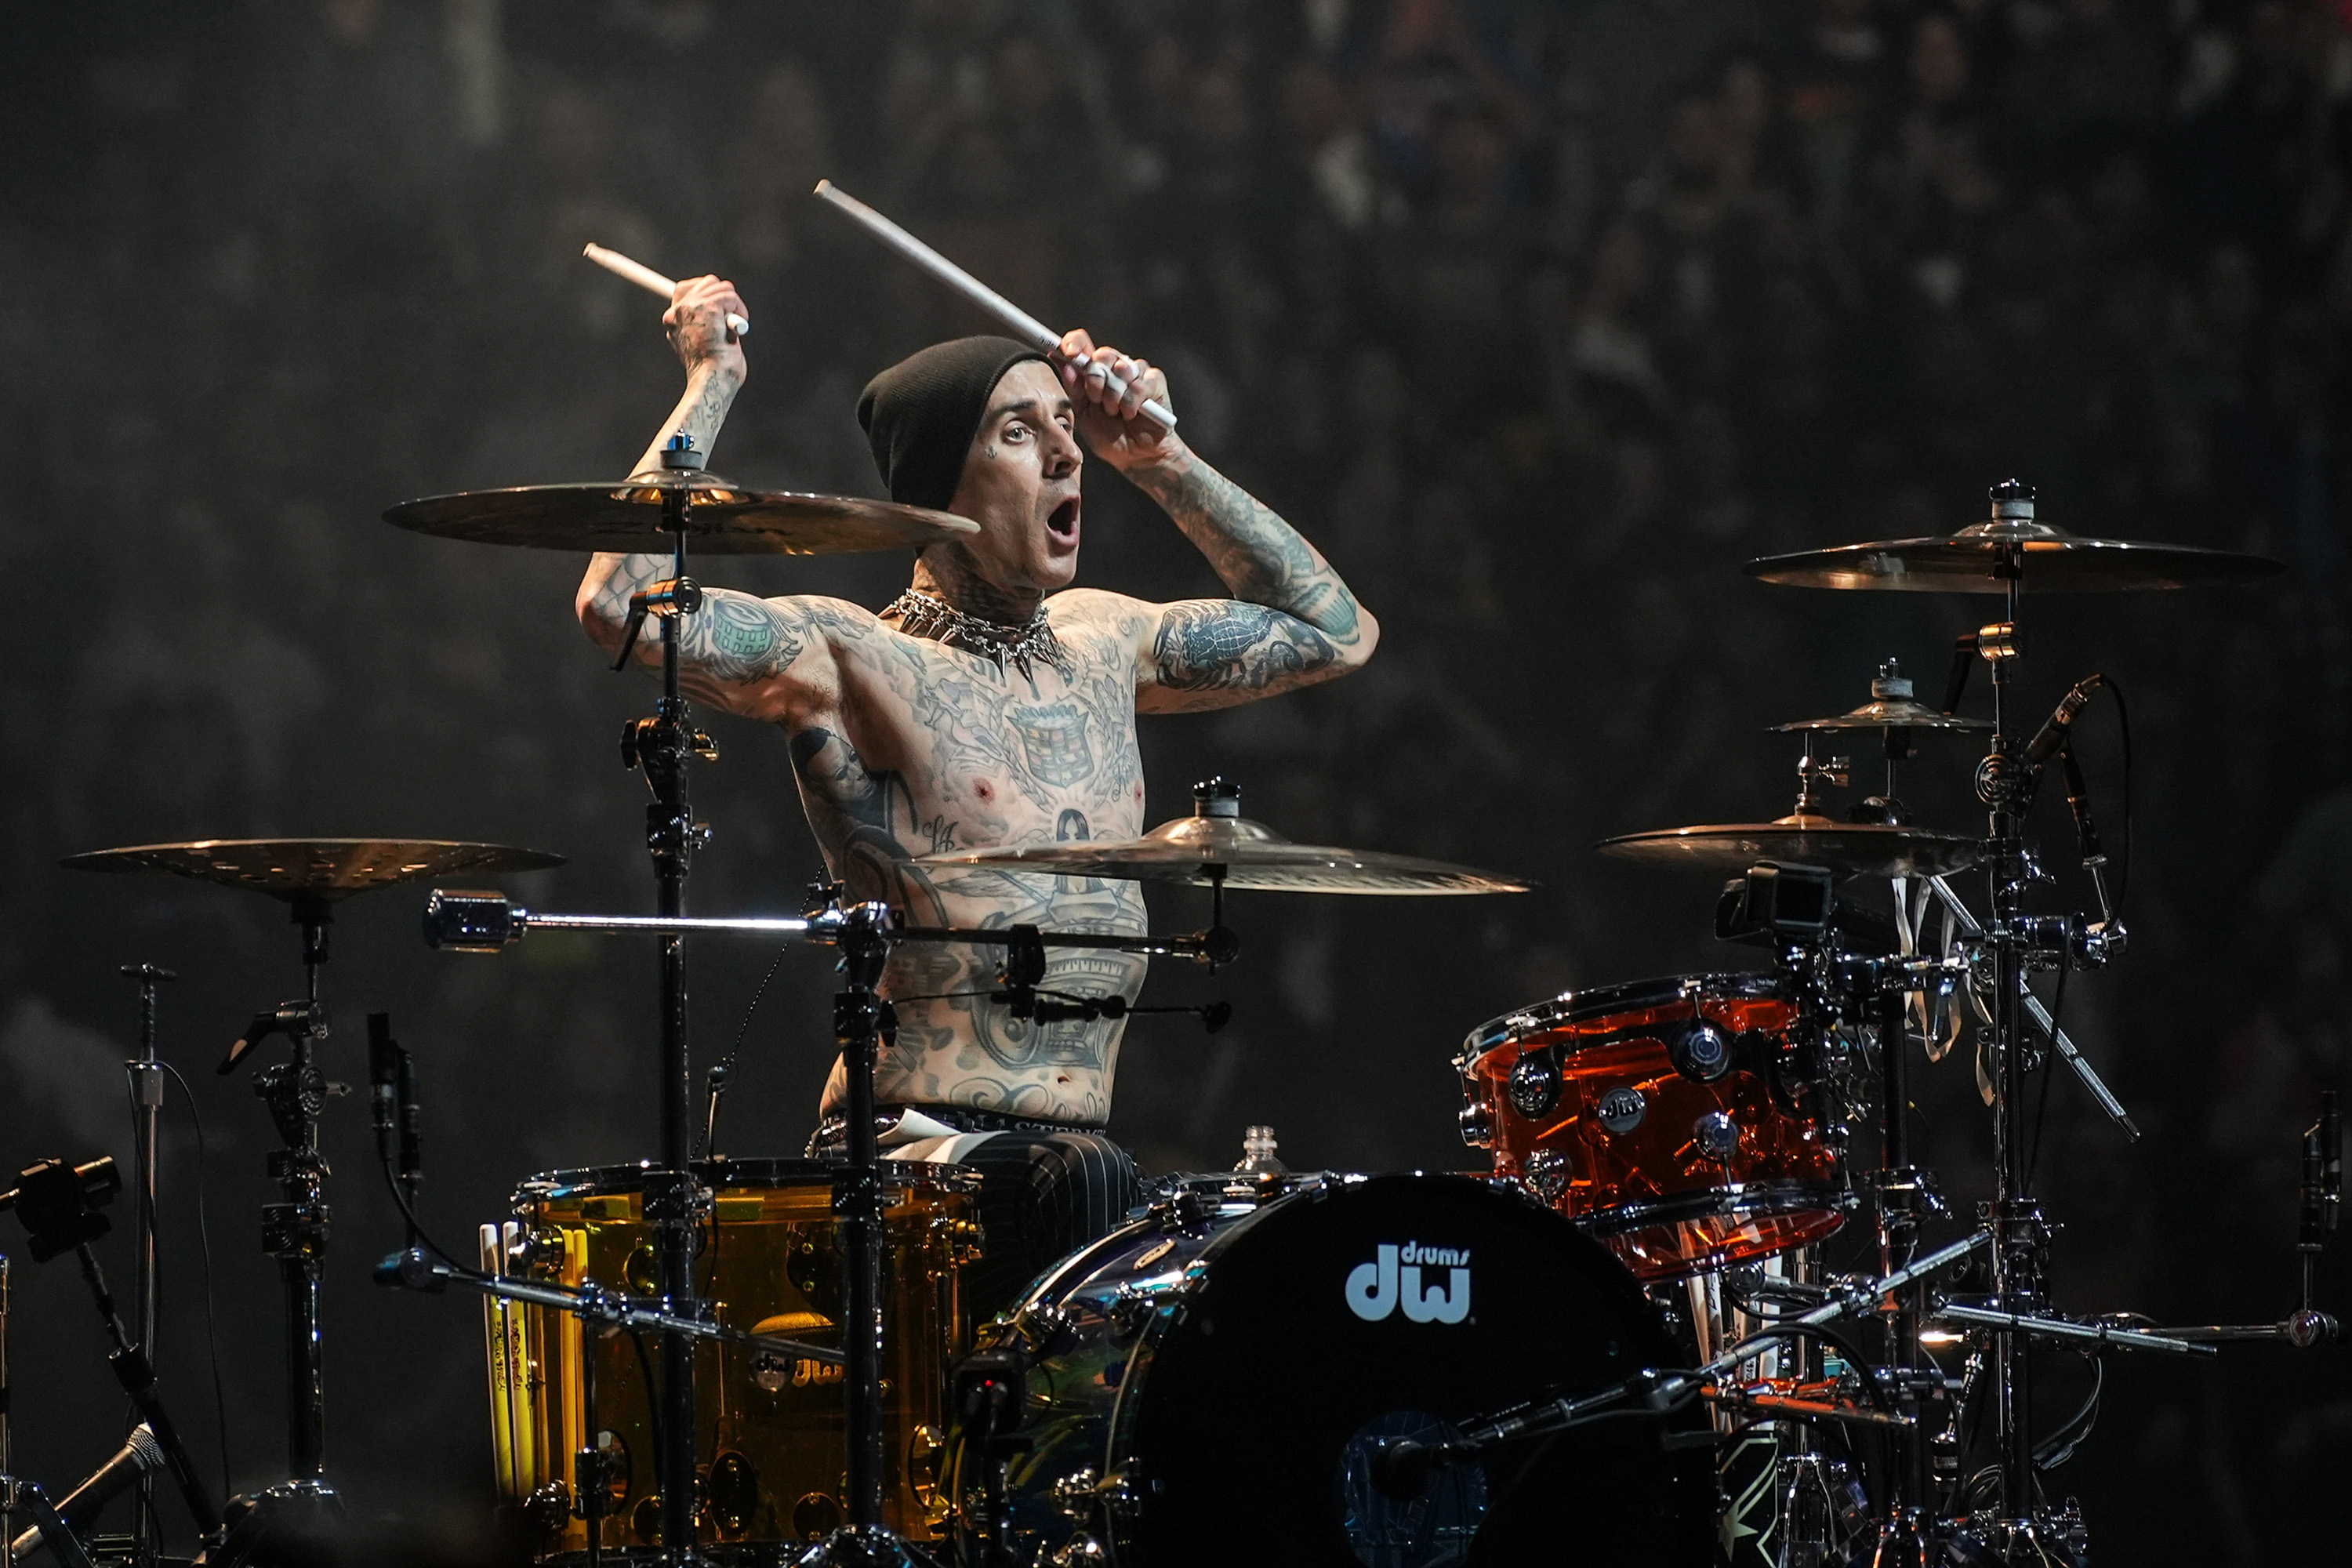 Travis Barker of Blink-182 performs onstage at Madison Square Garden on May 19, 2023, in New York City.